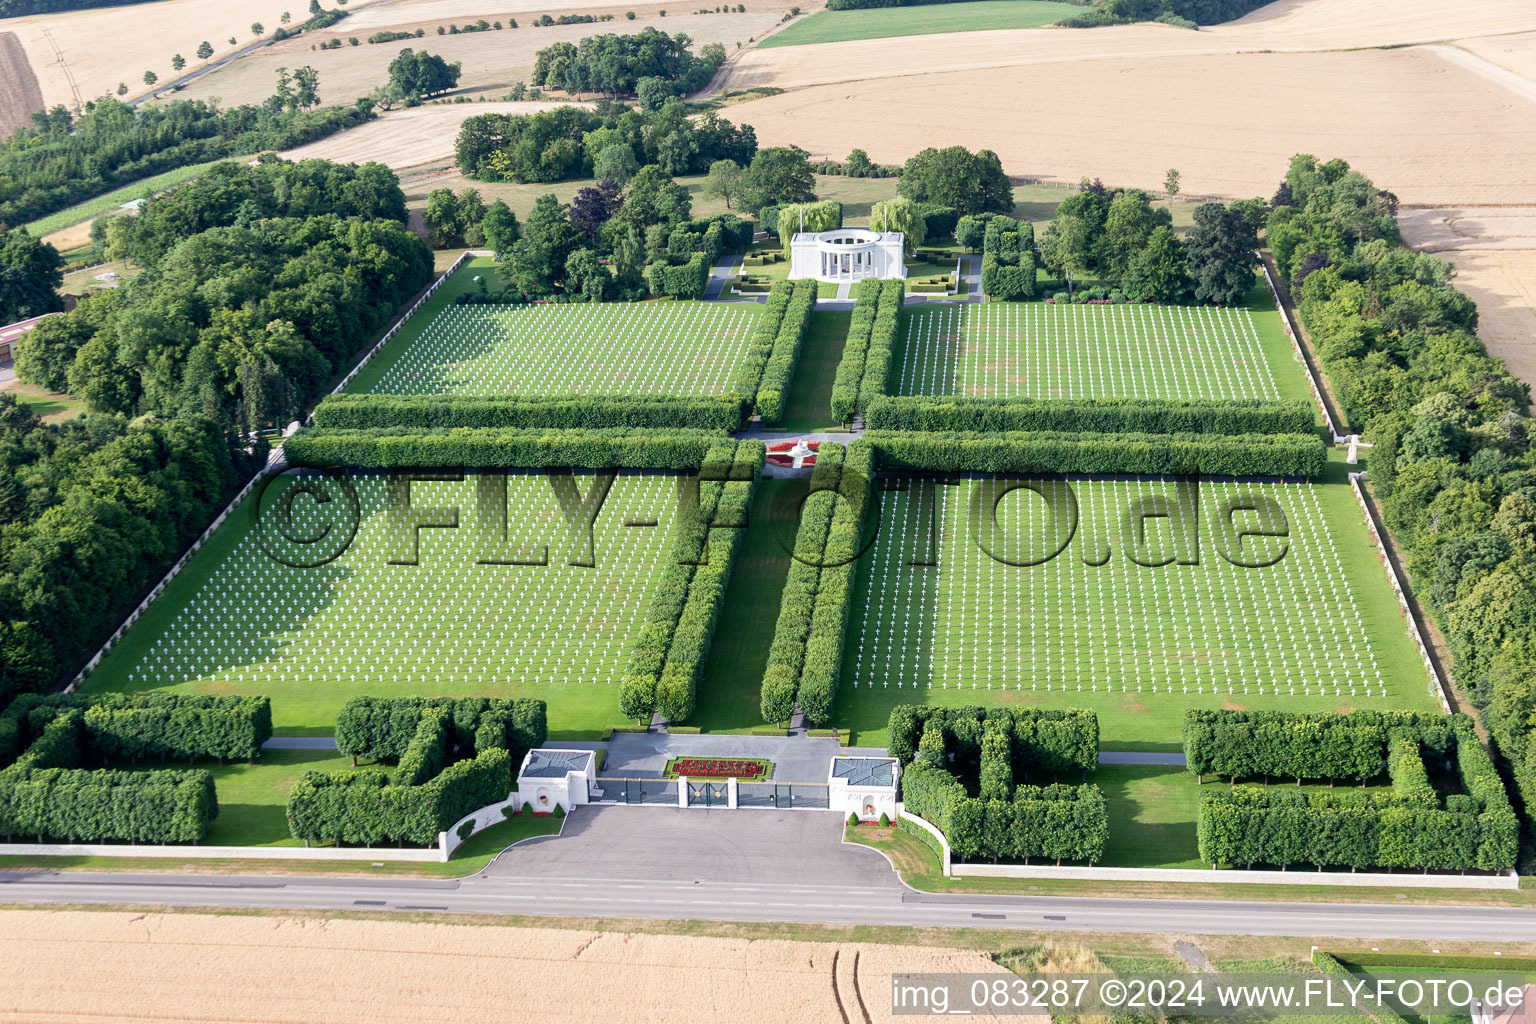 Grave rows on the grounds of the American Cemetery Saint Mihiel in Thiaucourt-Regnieville in Grand Est, France out of the air